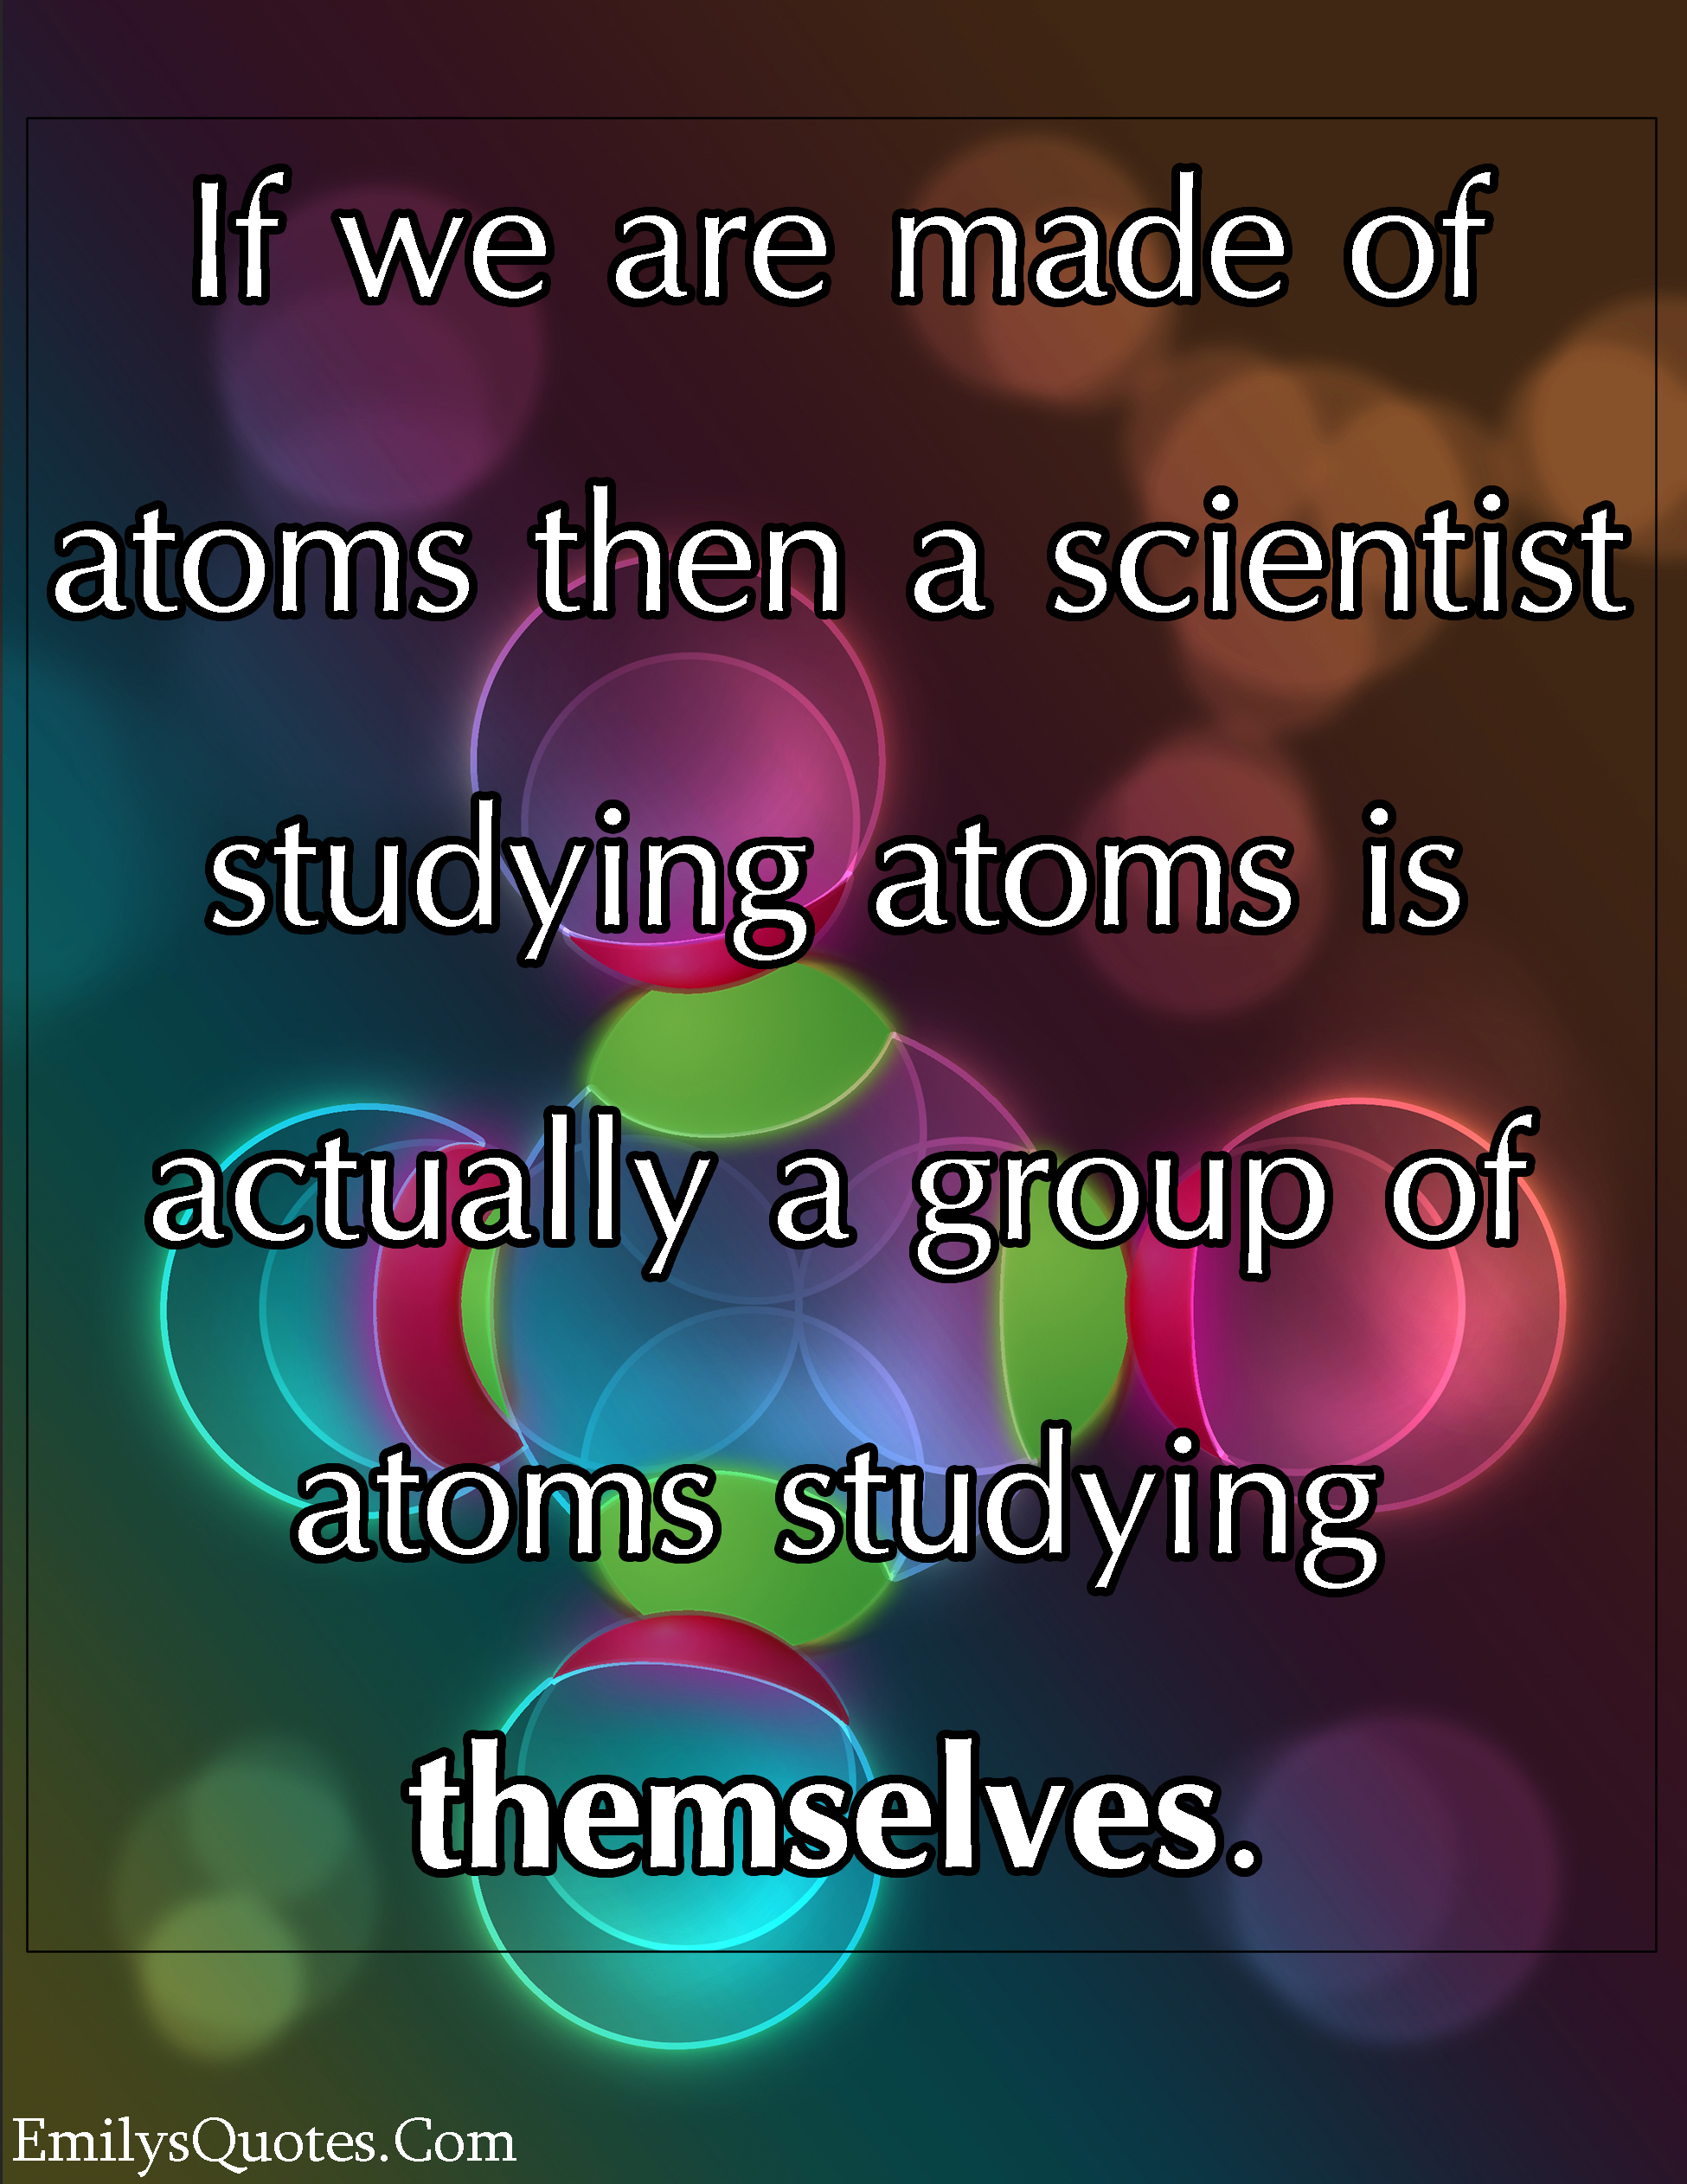 If we are made of atoms then a scientist studying atoms is actually a group of atoms studying themselves